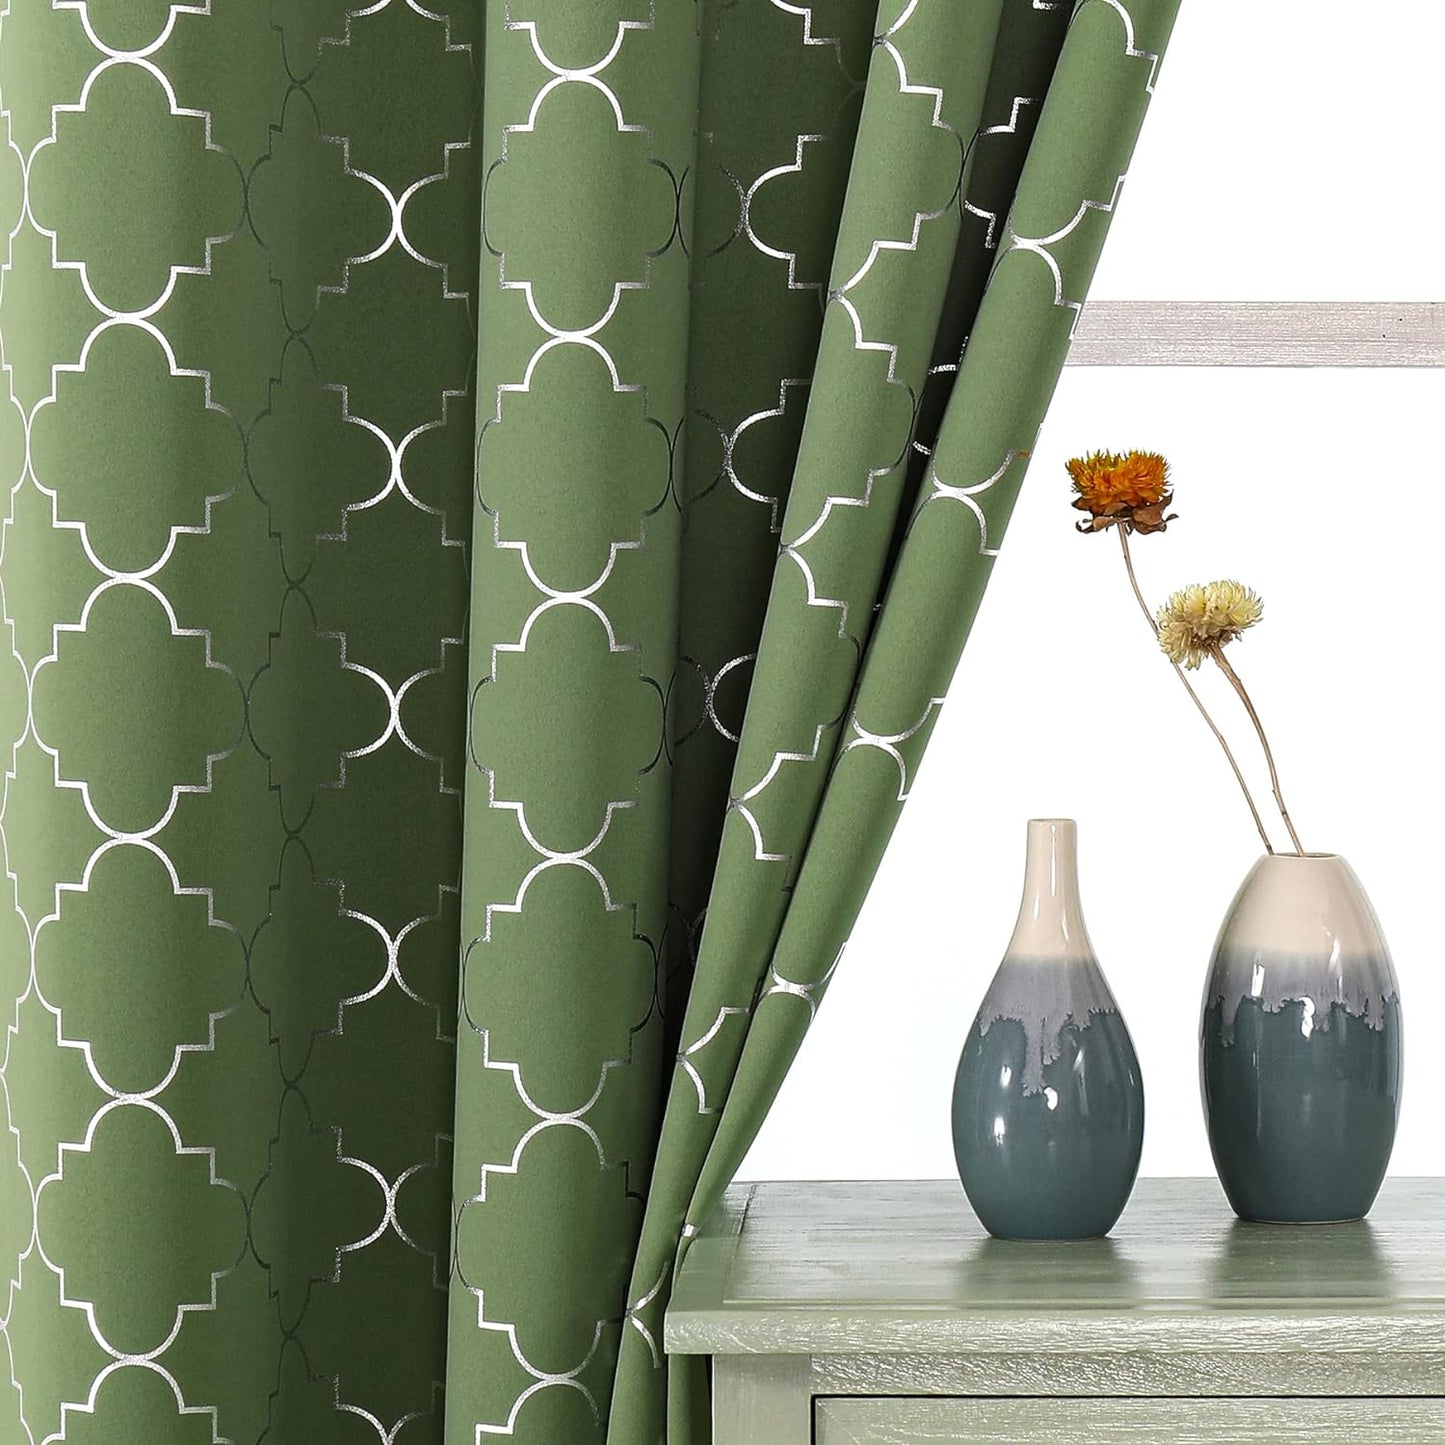 Enactex 100% Full Blackout Curtains 63 Inch Length Thermal Insulated Grey Curtain with Gold Geometric Metallic Pattern, Light Blocking Grommet Window Drapes for Living Room Bedroom, 2 Panels  Enactex Green/Silver W52" X L84" X2 